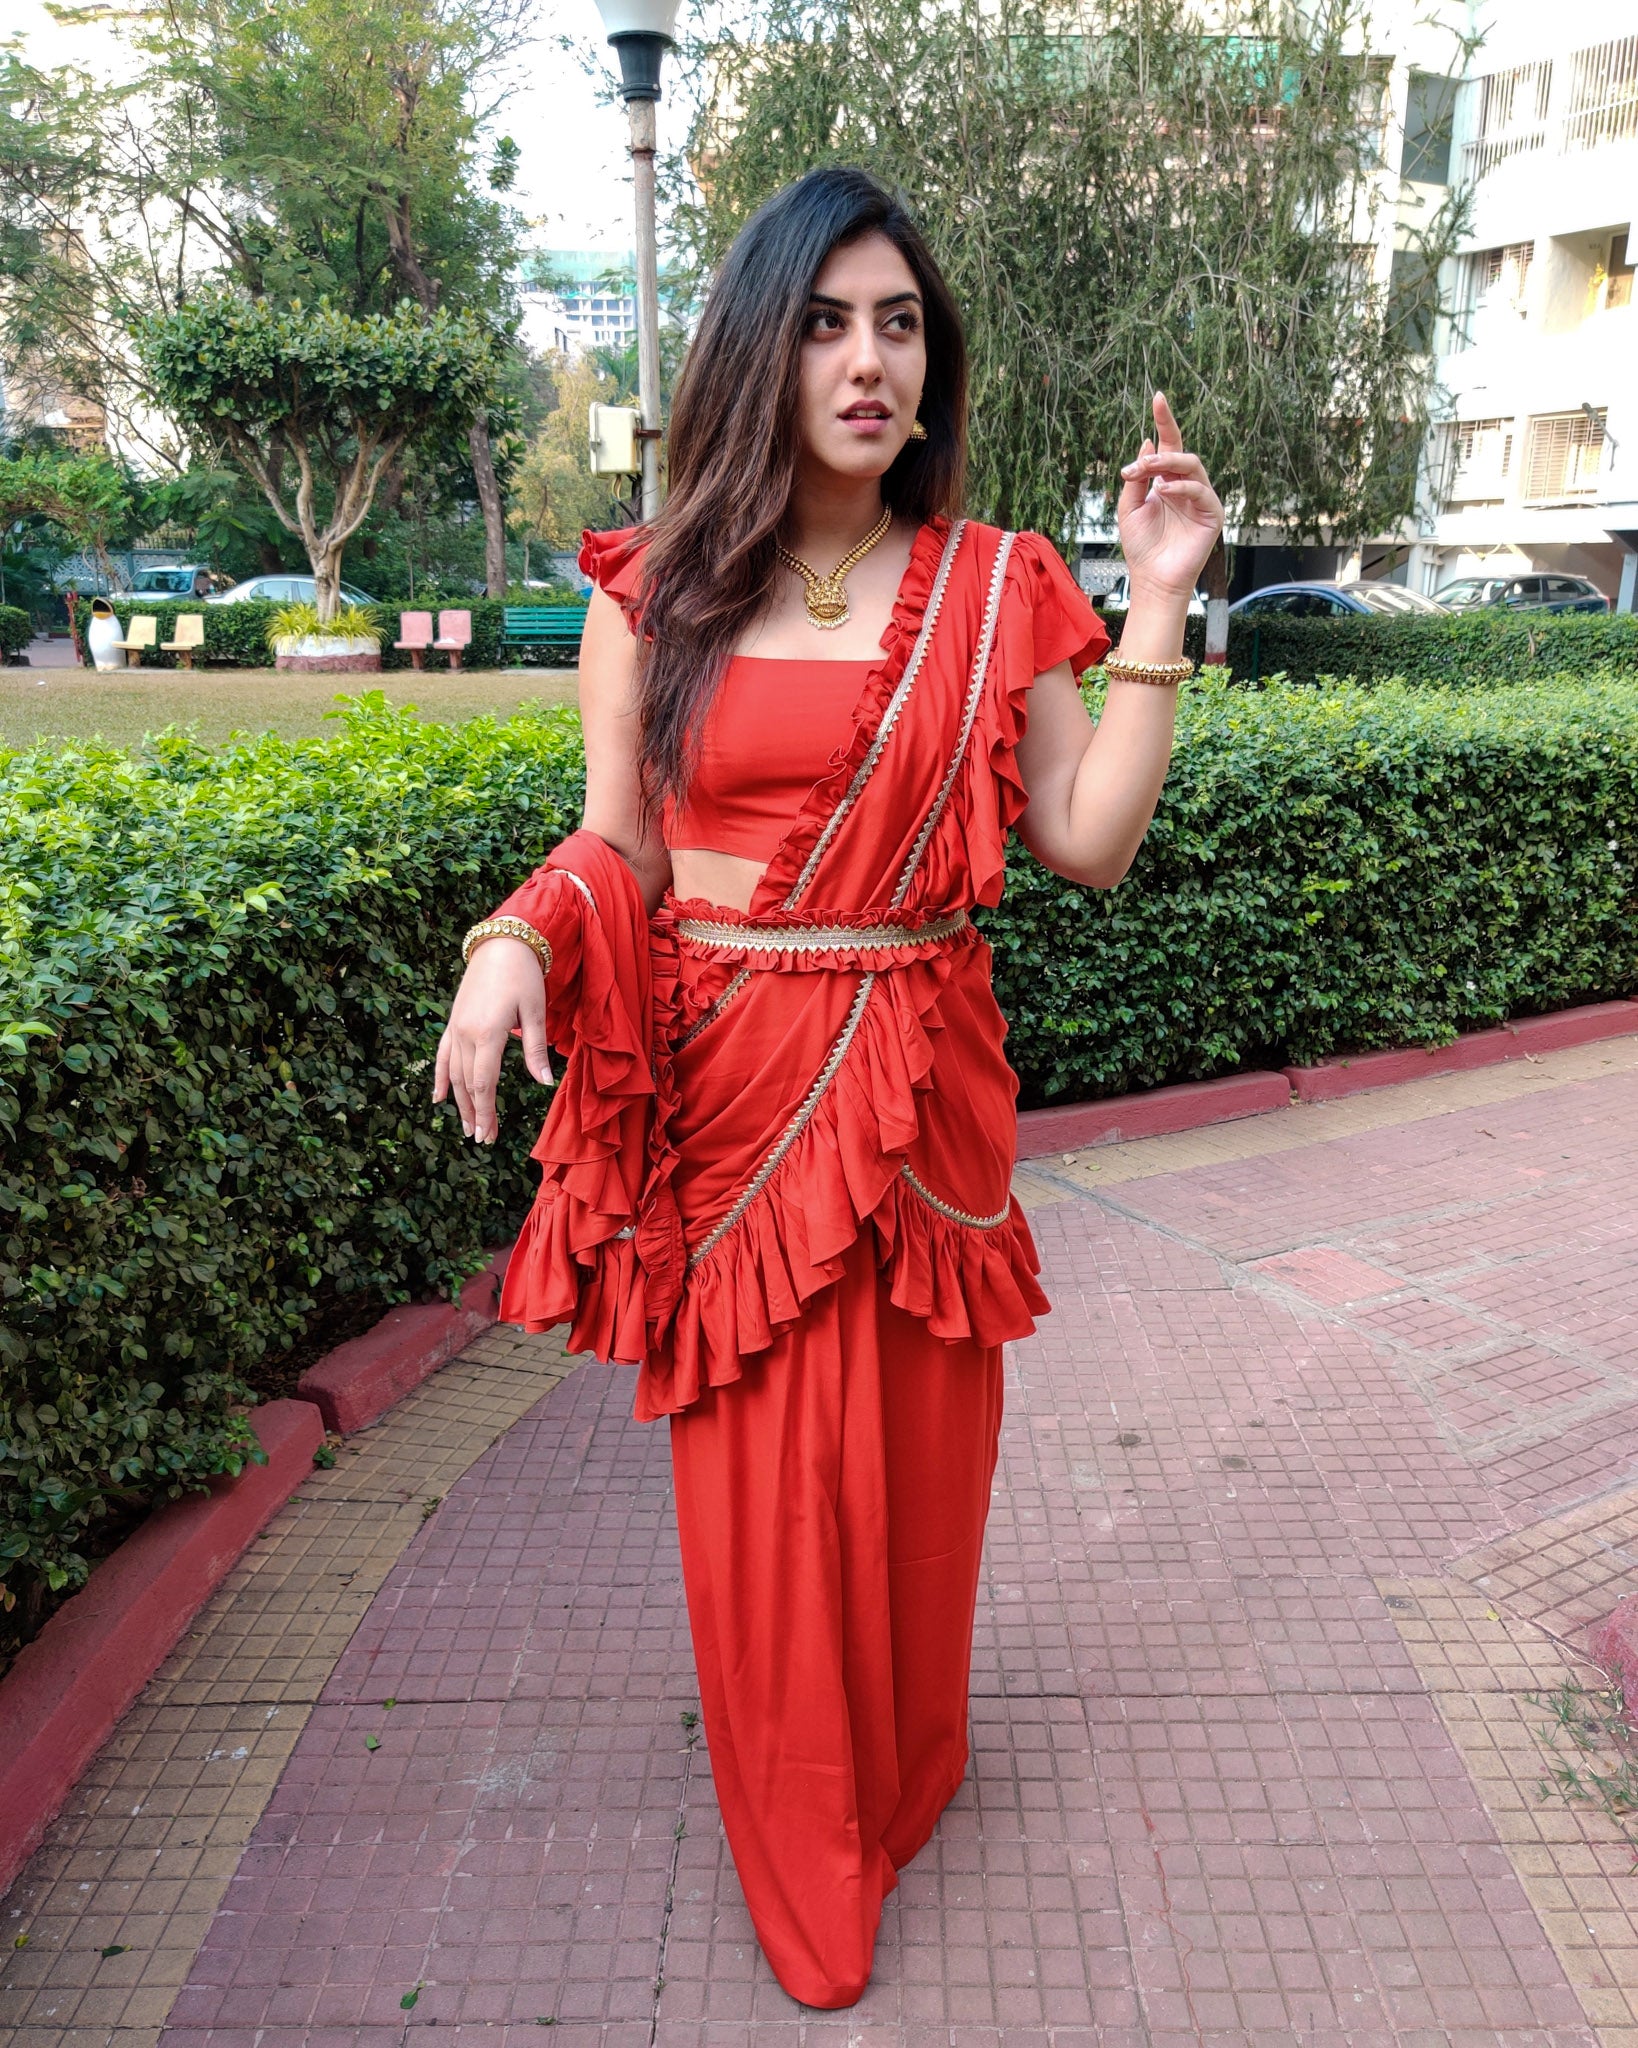 RED RUFFLE SKIRT SAREE WITH FRILLED BLOUSE